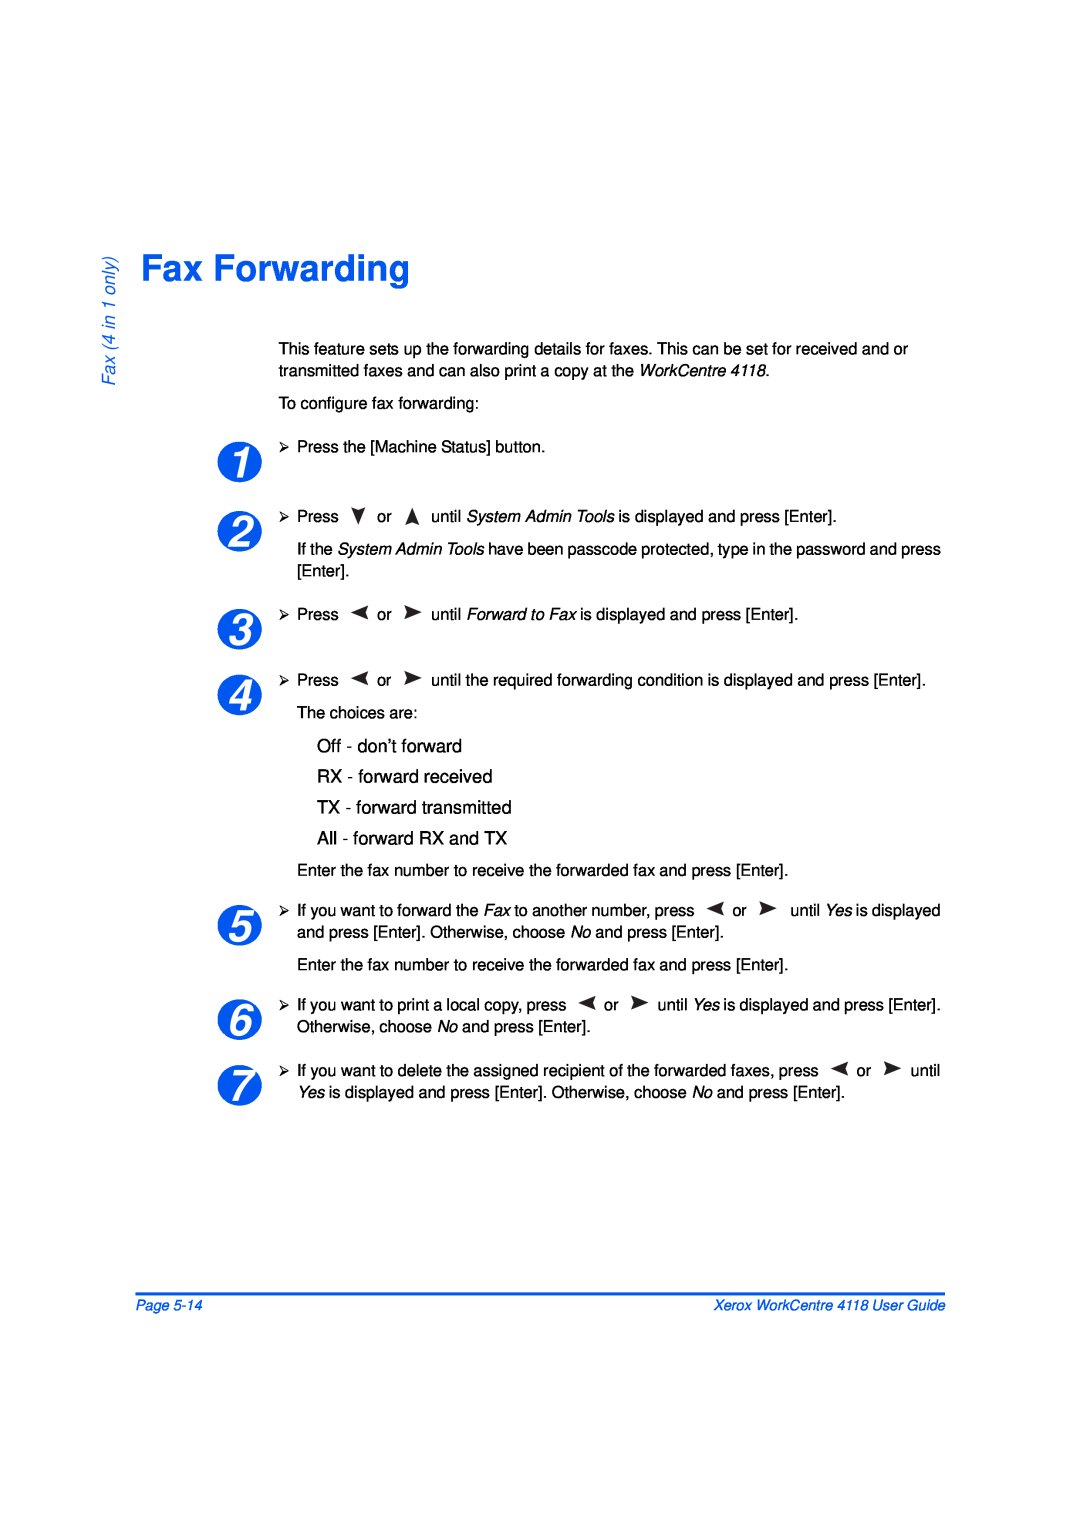 Xerox 32N00467 manual Fax Forwarding, Fax 4 in 1 only, Off - don’t forward RX - forward received TX - forward transmitted 